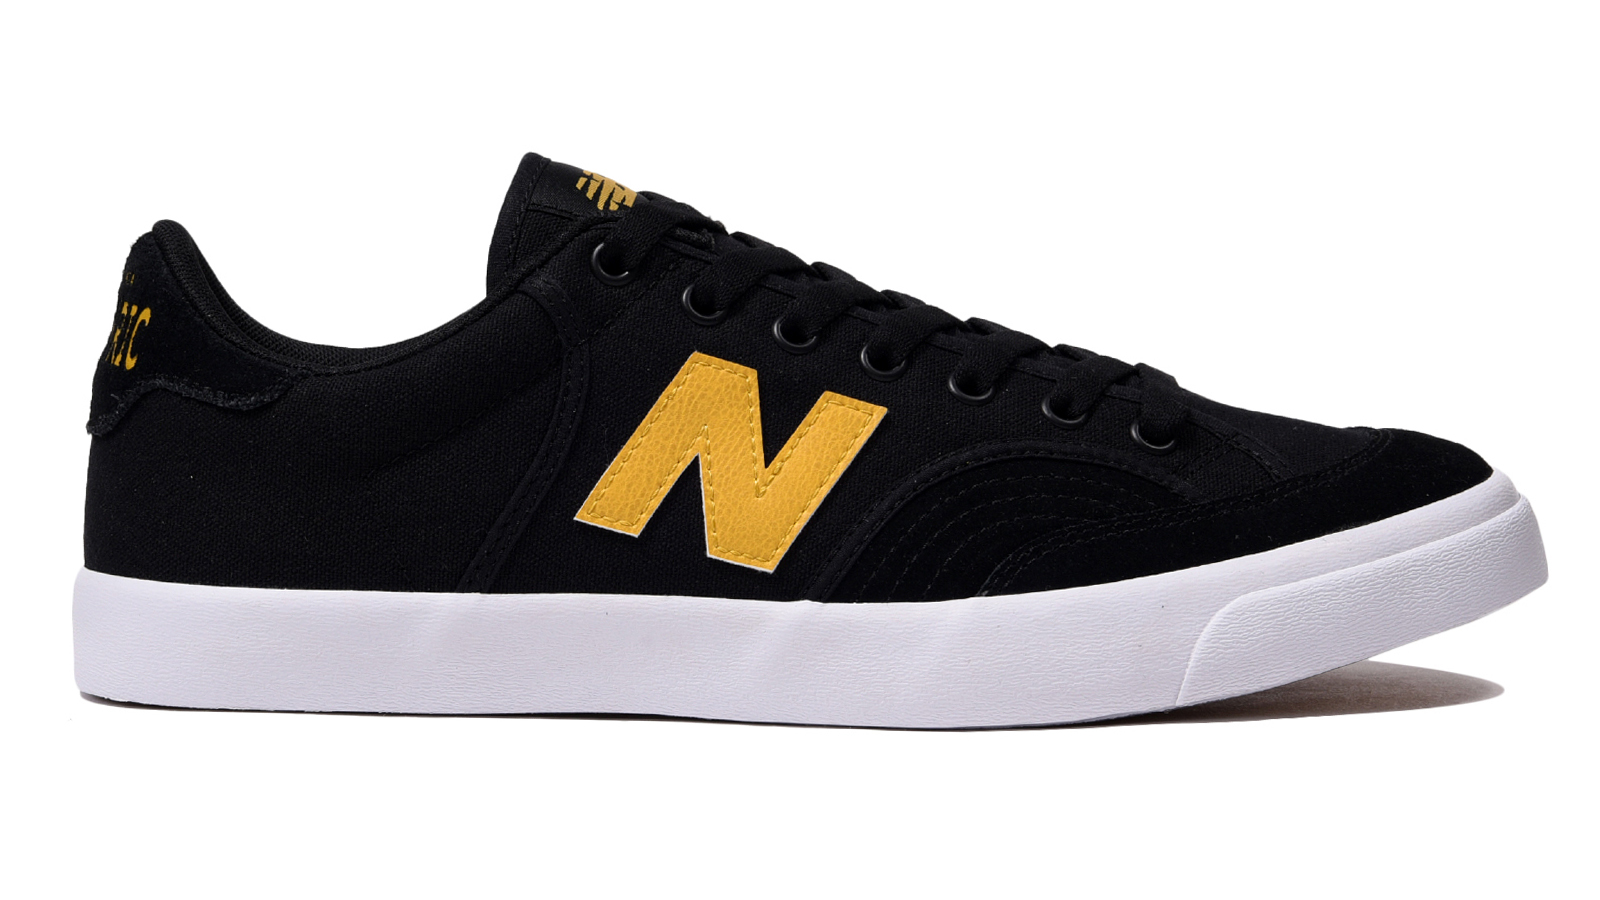 PRODUCTS] NEW BALANCE NUMERIC - NM212 & NM913 | VHSMAG